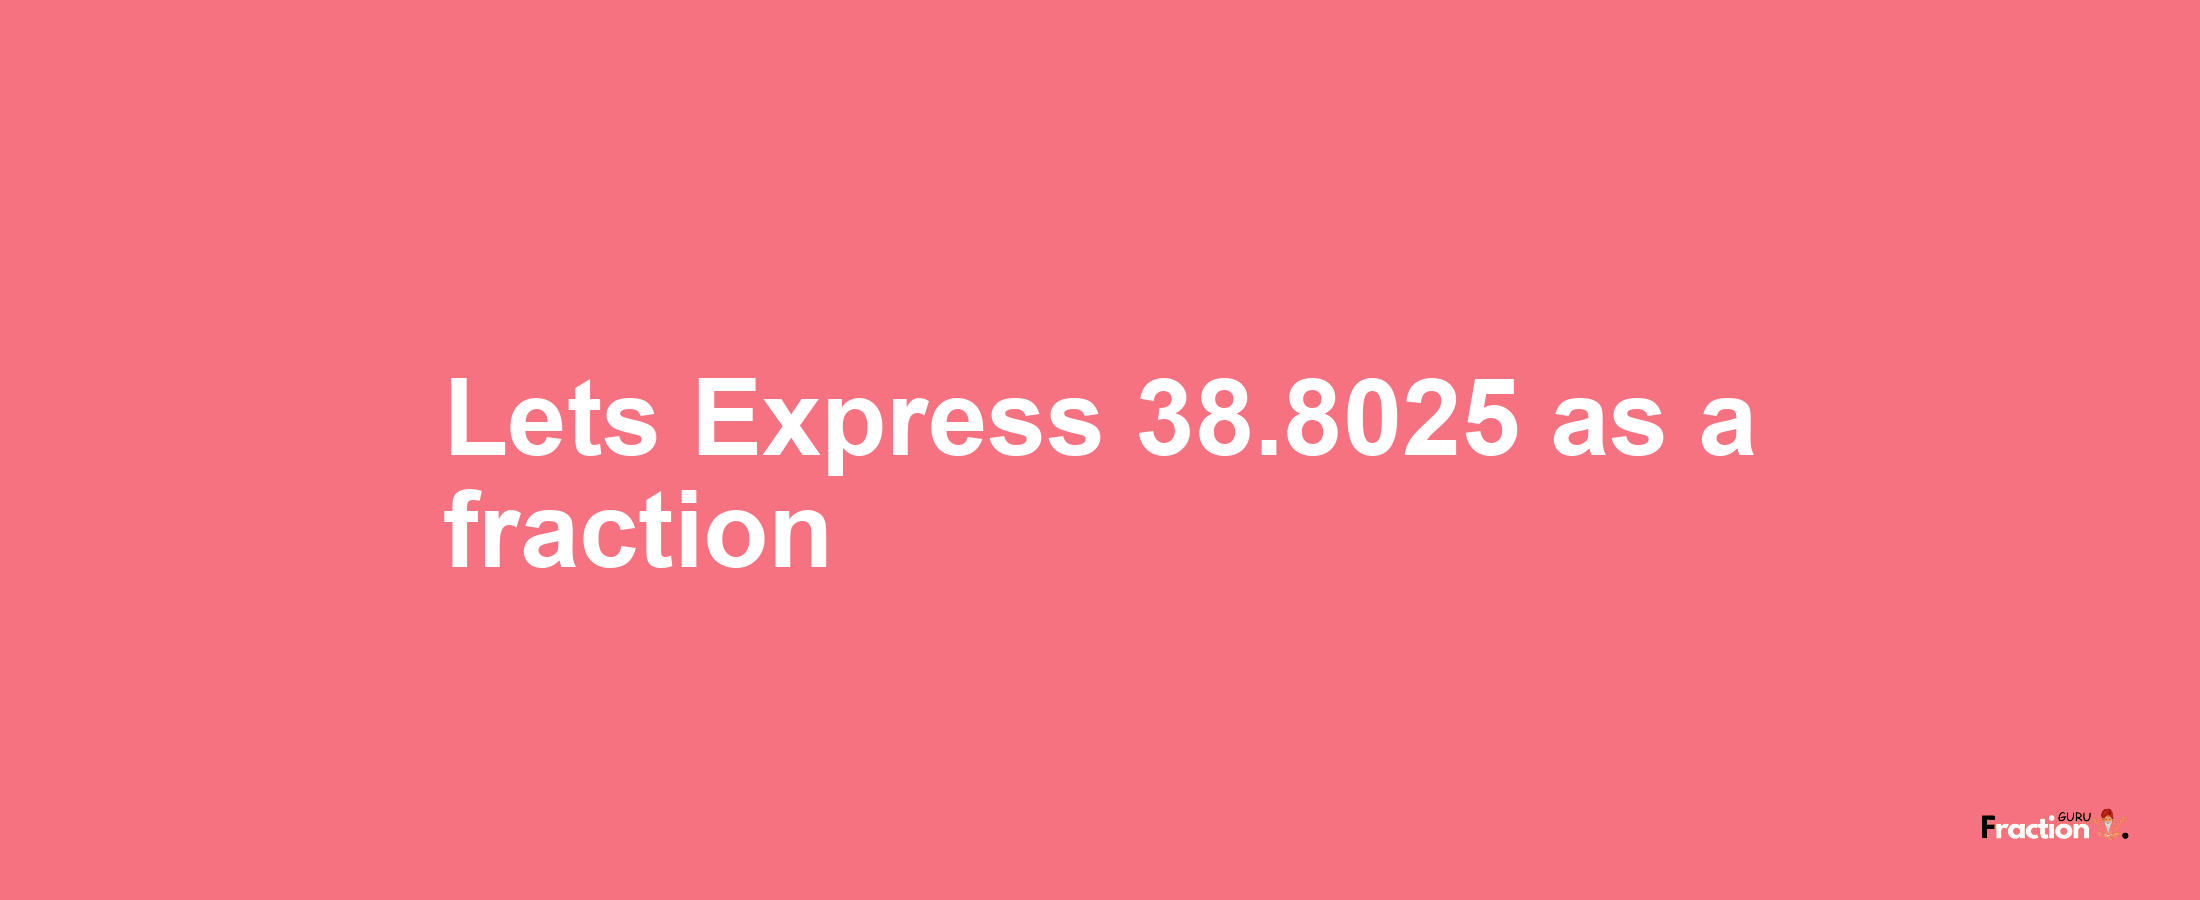 Lets Express 38.8025 as afraction